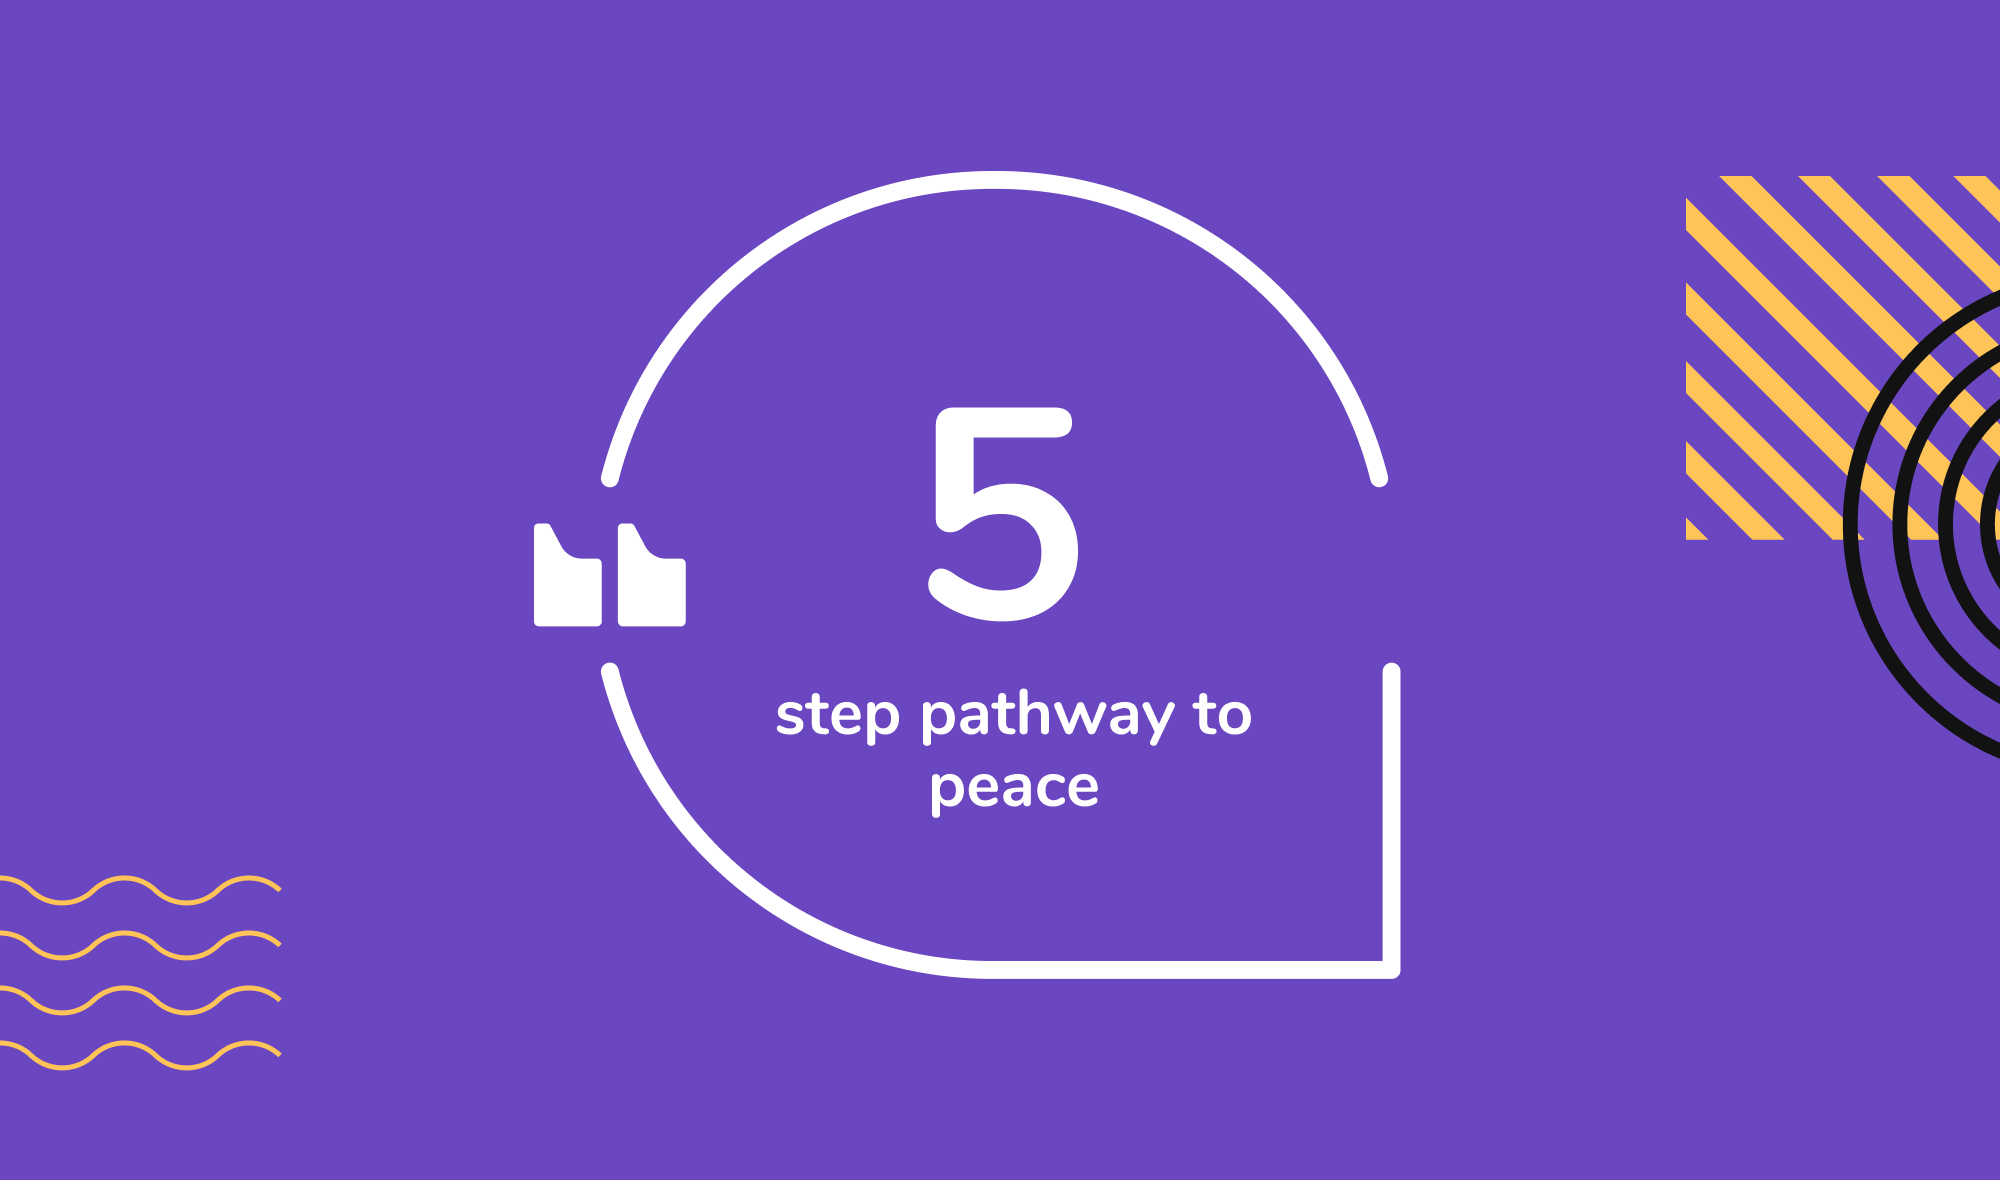 Steps for conflict resolution: a 5-step pathway to peace